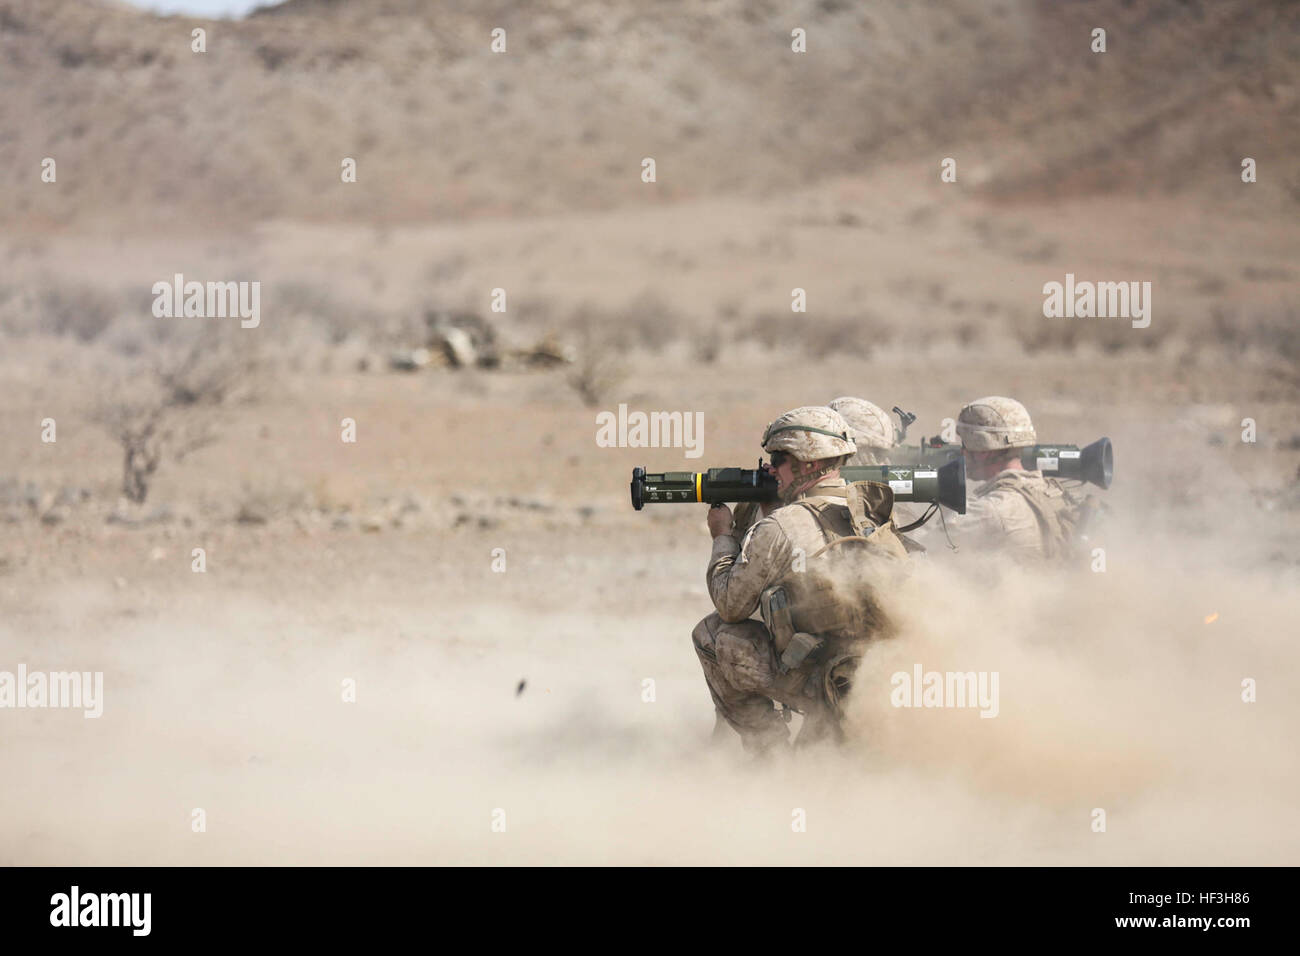 Djibouti (July 22, 2015) U.S. Marines with Battalion Landing Team 3rd Battalion, 1st Marine Regiment, 15th Marine Expeditionary Unit fire AT-4 rockes during a rocket training exercise.  The Marines of BLT 3/1 conduct a series of attack and maneuver drills in Djibouti consisting of frag, machine gun, squad and night drills. The 15th MEU is embarked on the Essex Amphibious Ready Group and deployed to maintain regional security in the U.S. 5th Fleet area of operations. (U.S. Marine Corps photo by Sgt. Jamean Berry/Not Released) Fire in the hole, U.S. Marines train with rockets in Djibouti 150723- Stock Photo